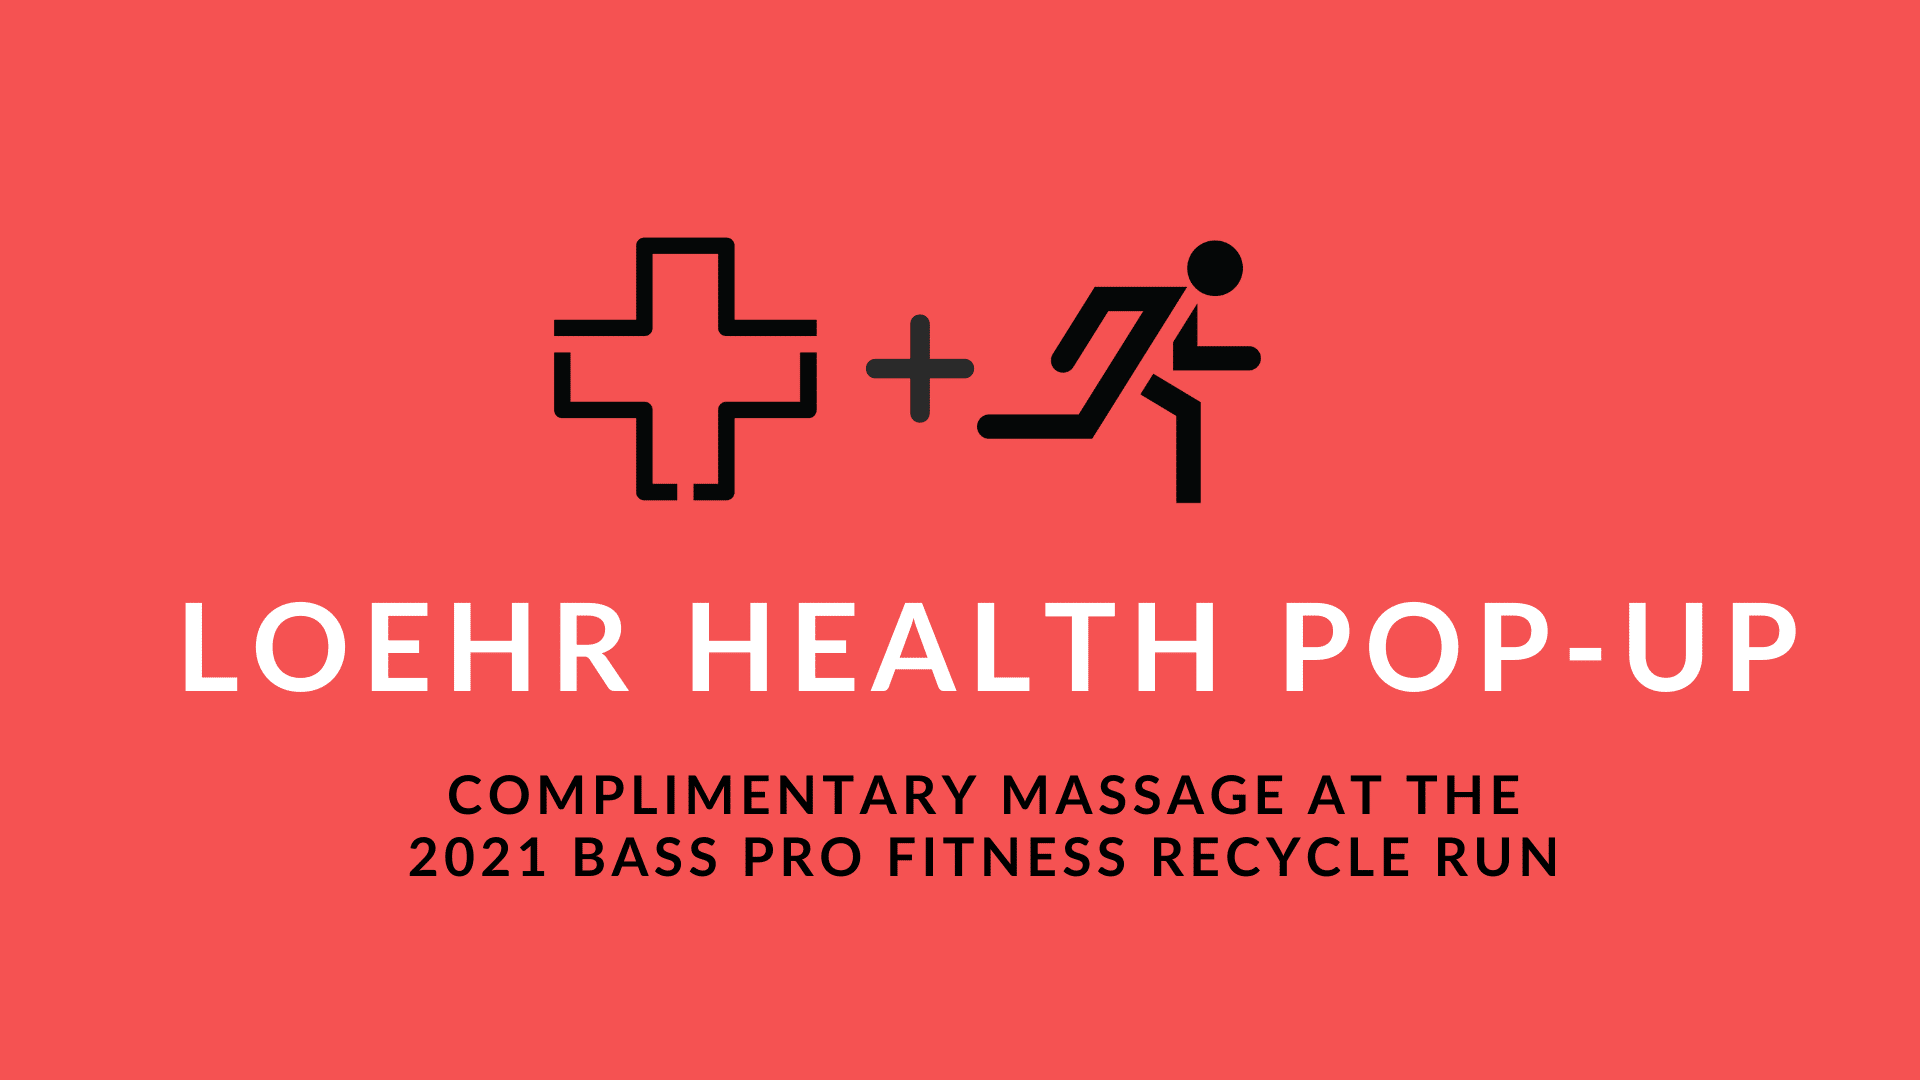 Loehr Health Pop-up. Free Massage at Bass Pro Recycle Run June 10, 2021.